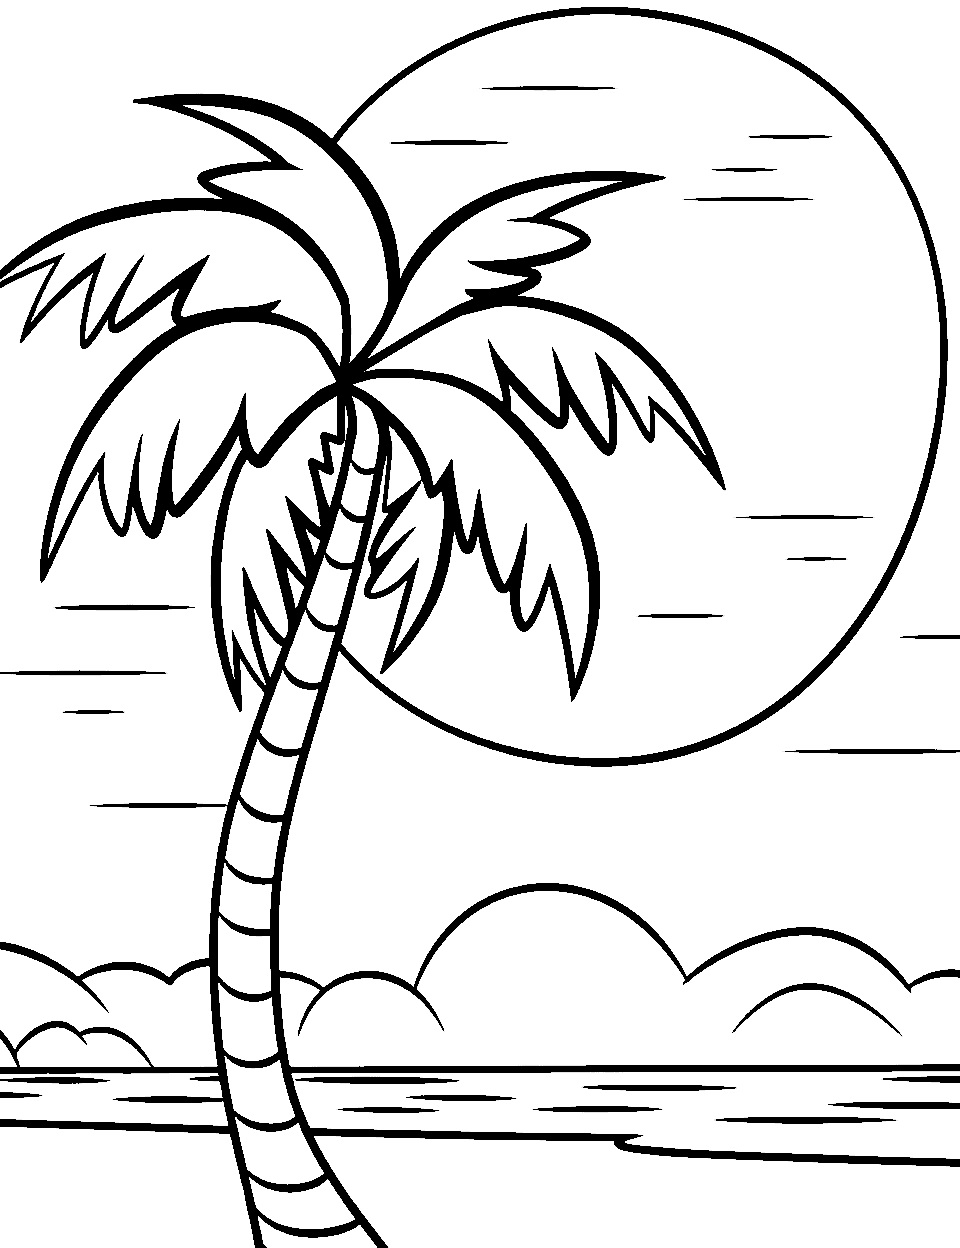 Sunset and Palm Tree Coloring Page - A colorful sunset sky with a single palm tree in the foreground.